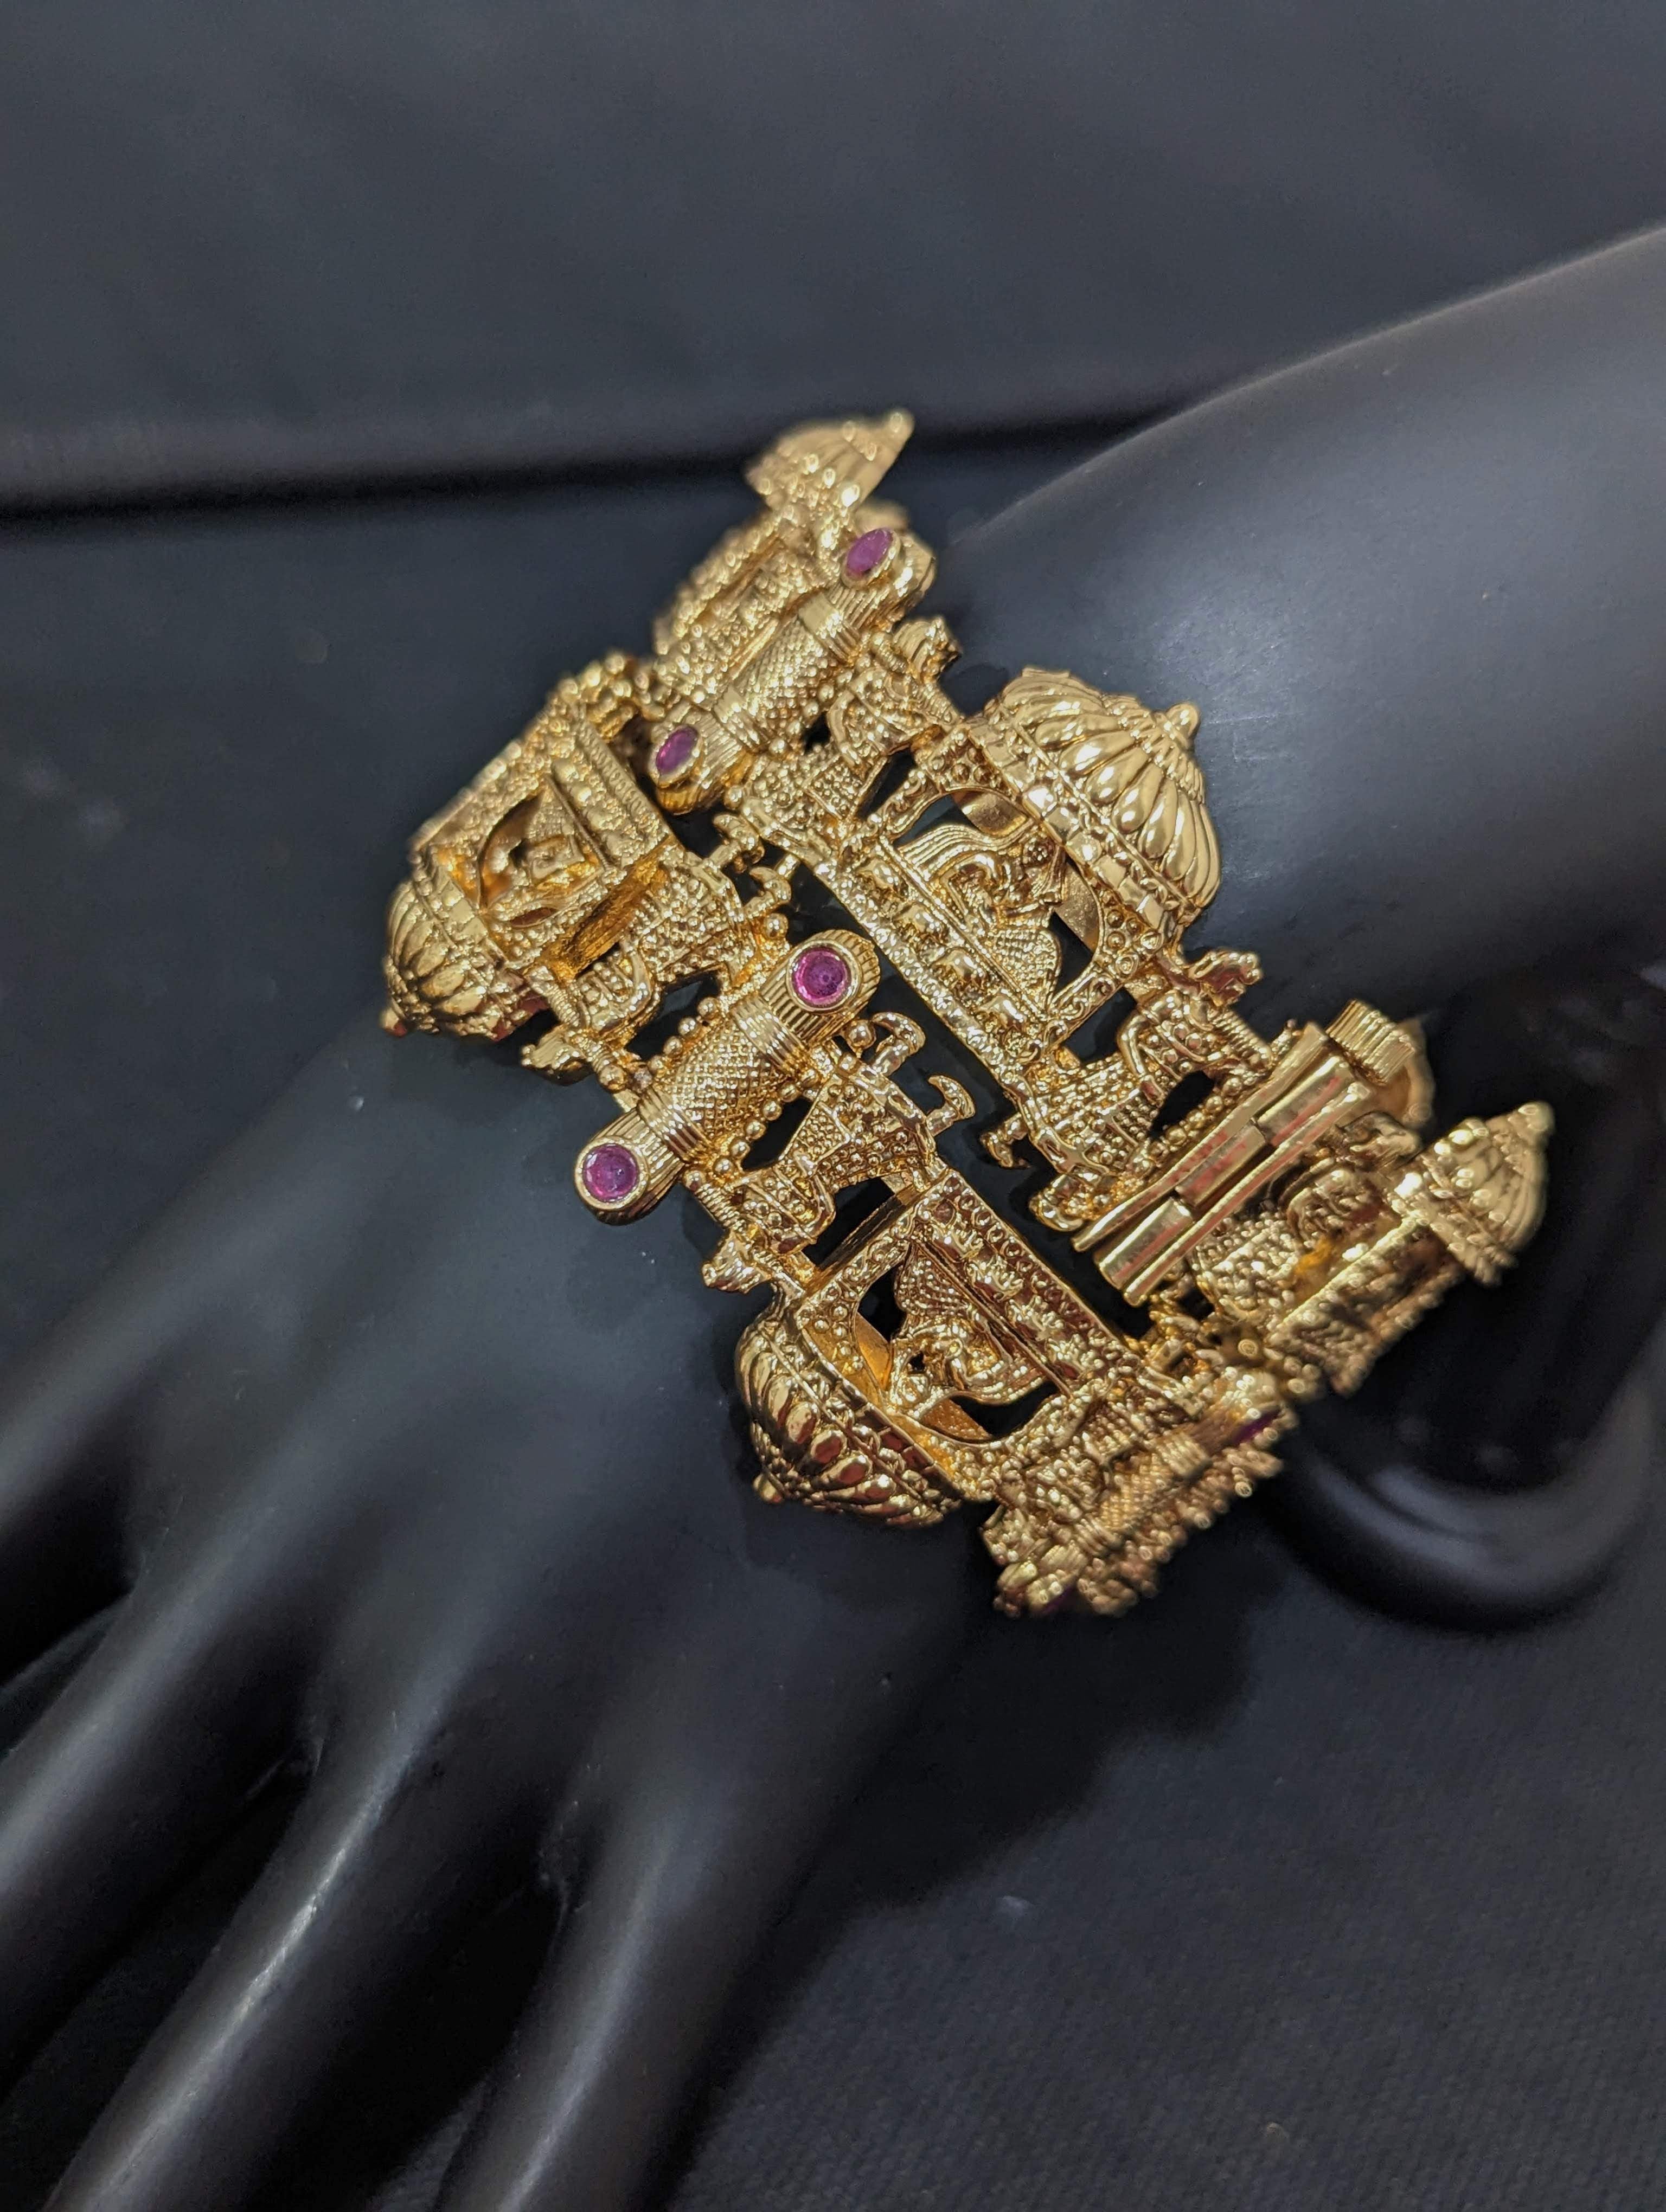 Tanishq - An intricately fashioned, broad bracelet, covering only the front  of her wrist, is believed to bring prosperity to the newly wedded Bodhu and  her partner. #RivaahBridesByTanishq For more, visit:  https://www.tanishq.co.in/rivaah/brides/oriya |